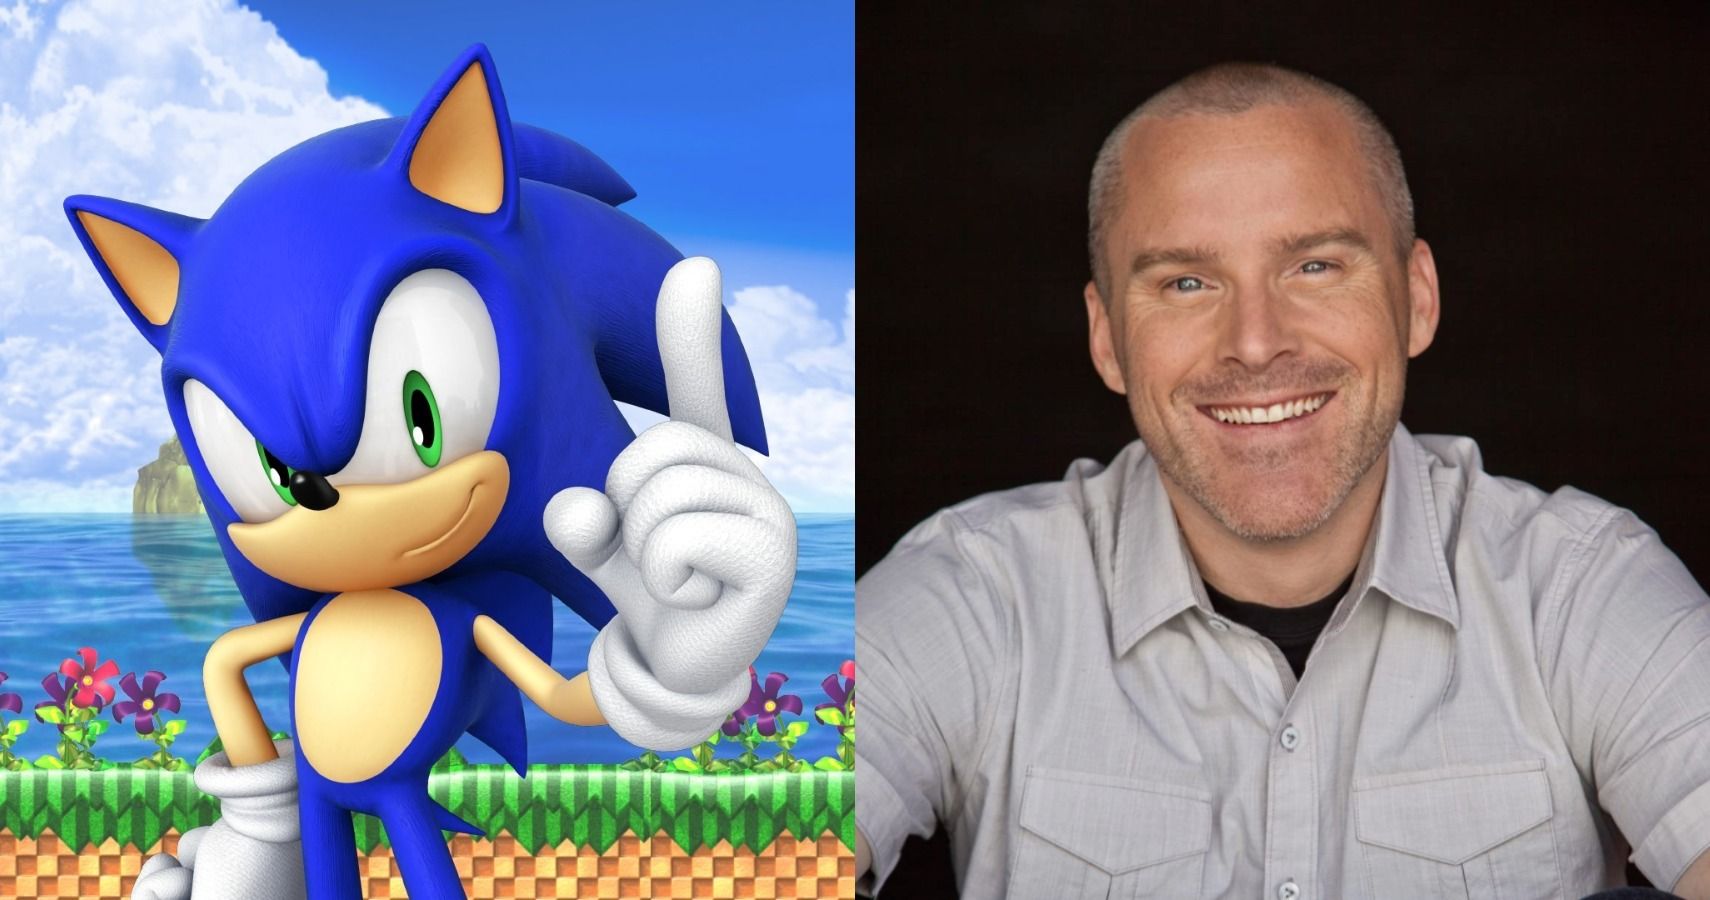 roger craig smith first sonic game